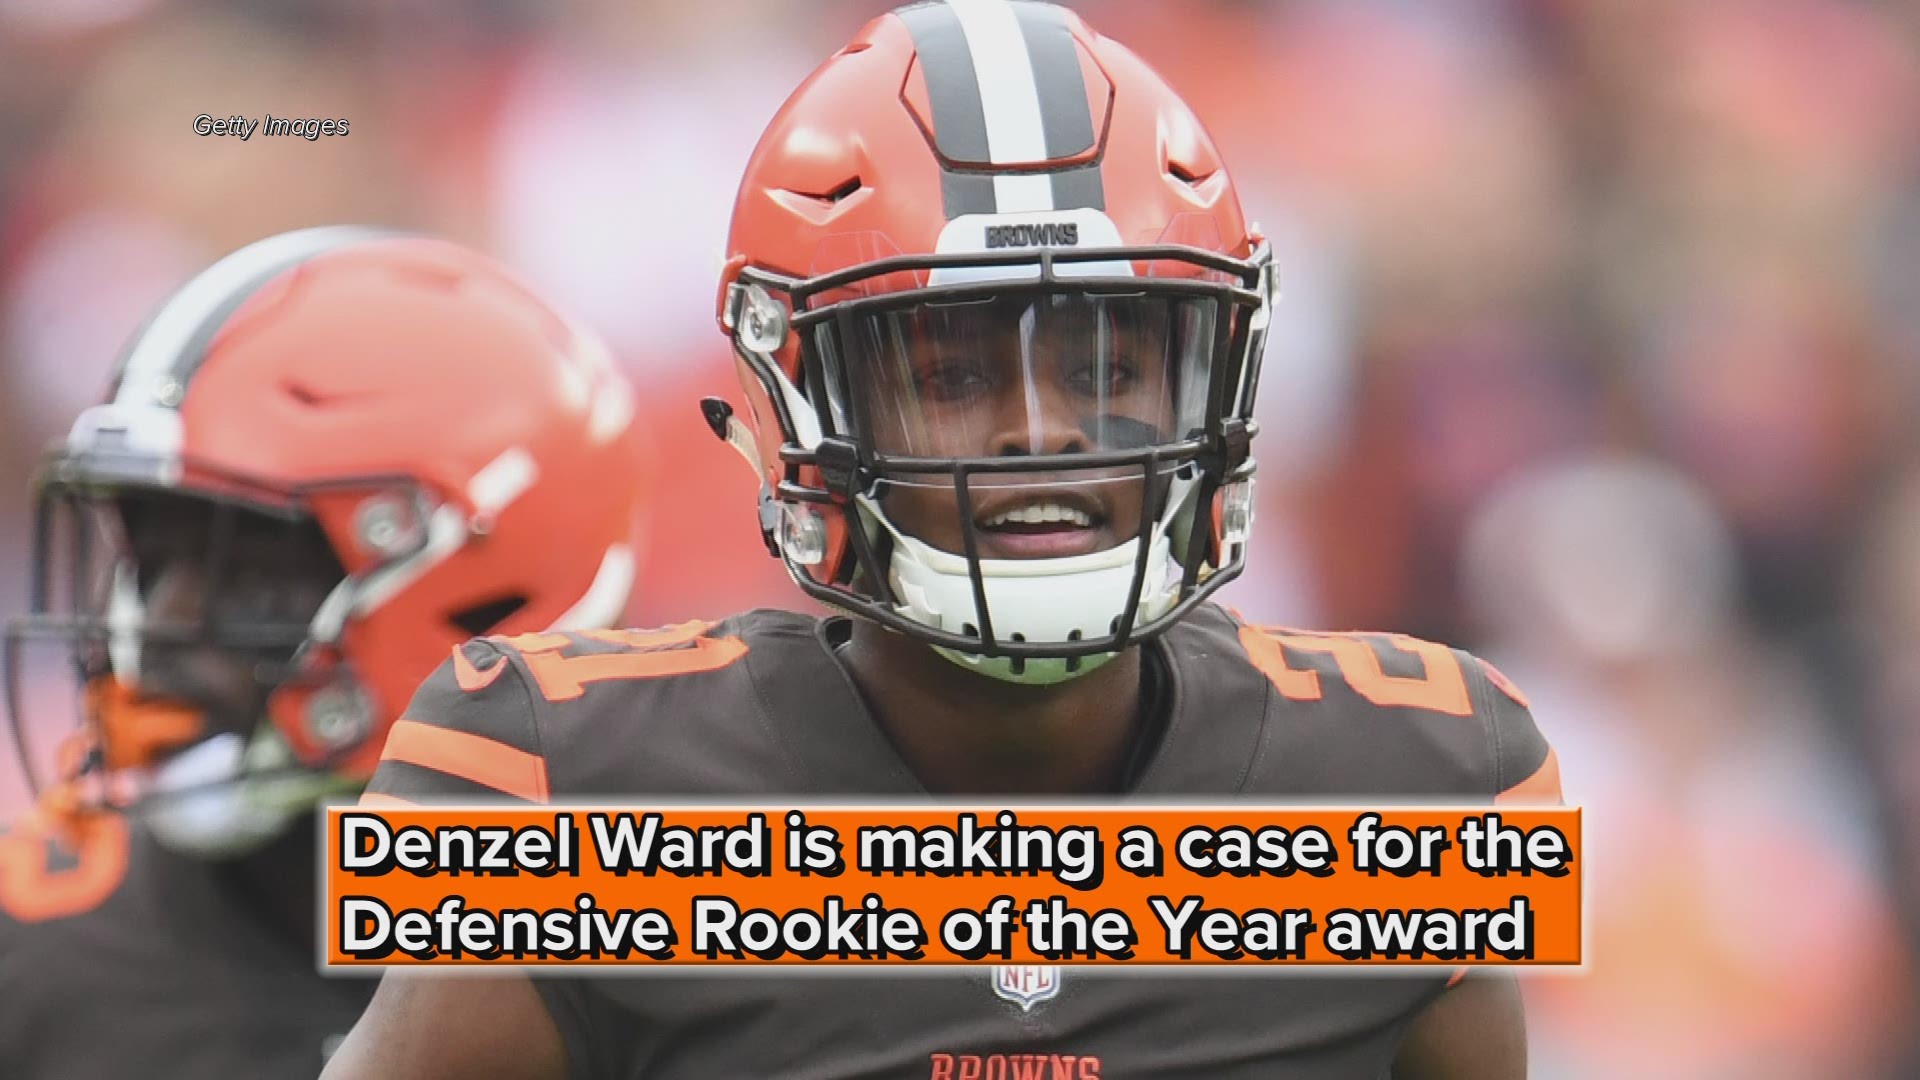 Cleveland Browns DB Denzel Ward continues making case for Defensive Rookie of the Year consideration